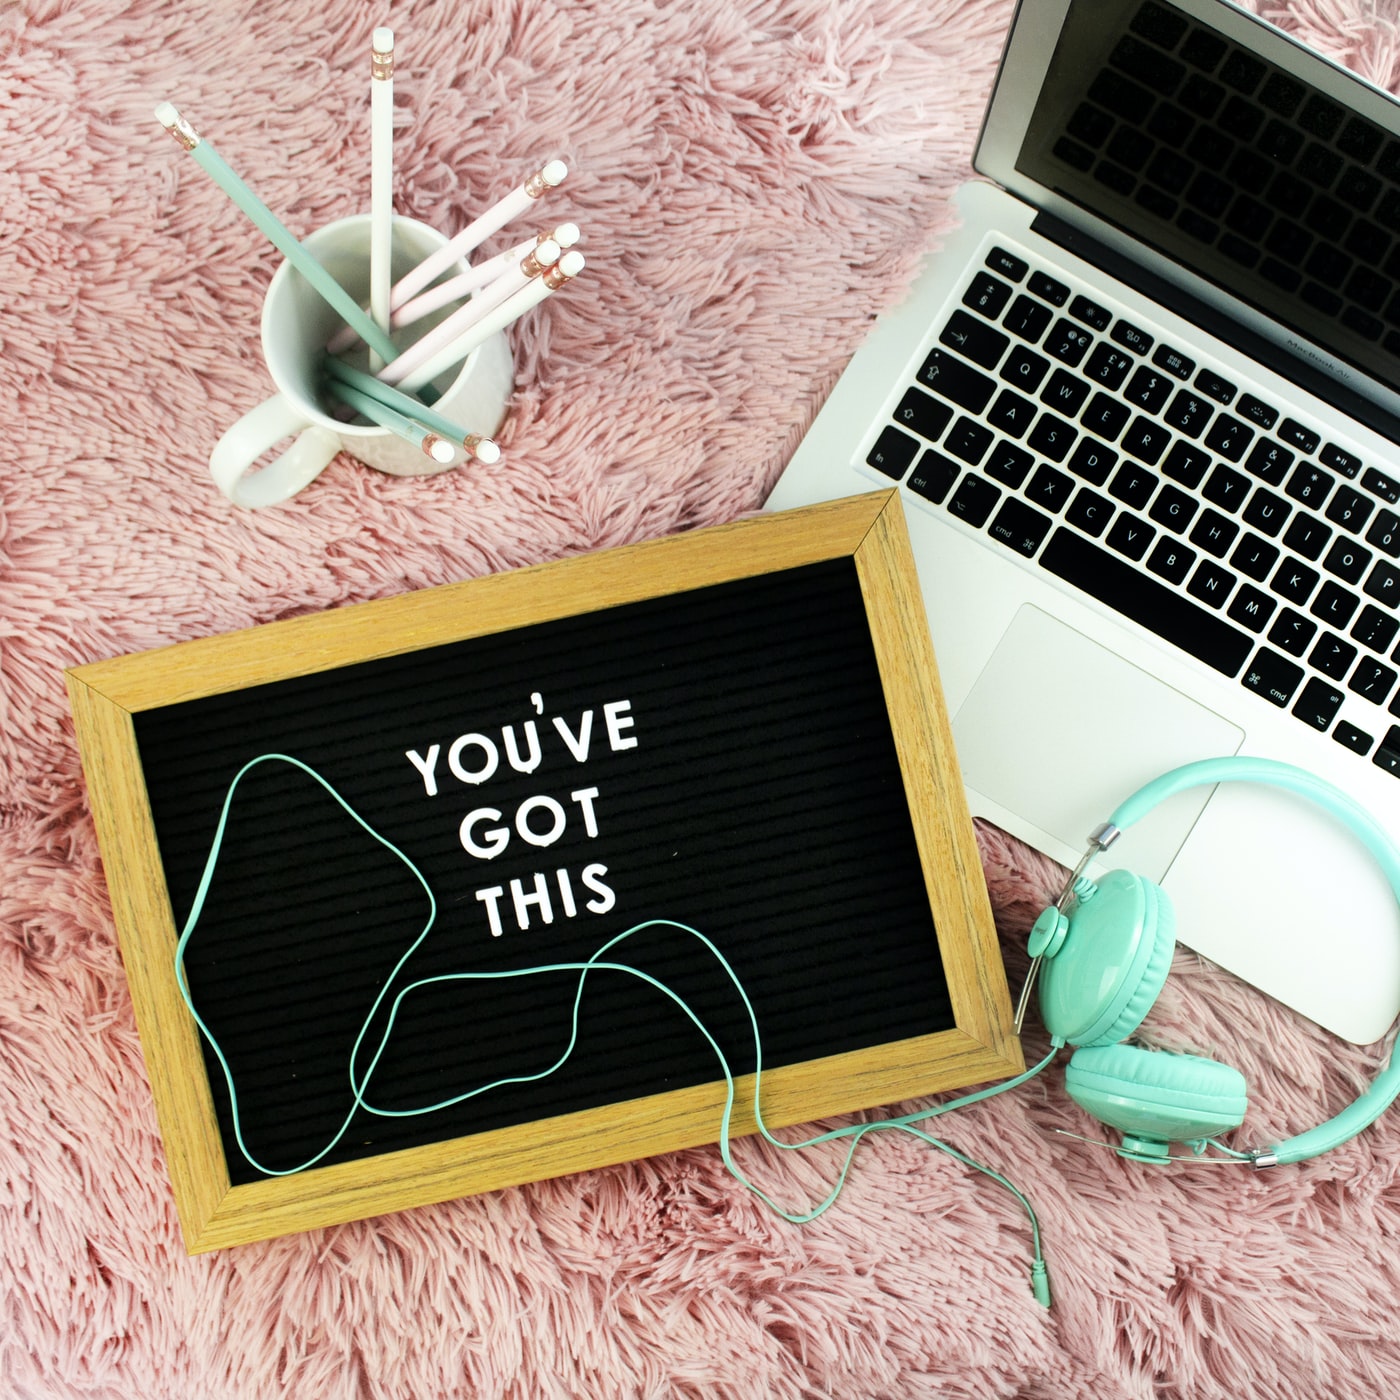 Computer, mug with pencils, headphones, and sign that says "you've got this"